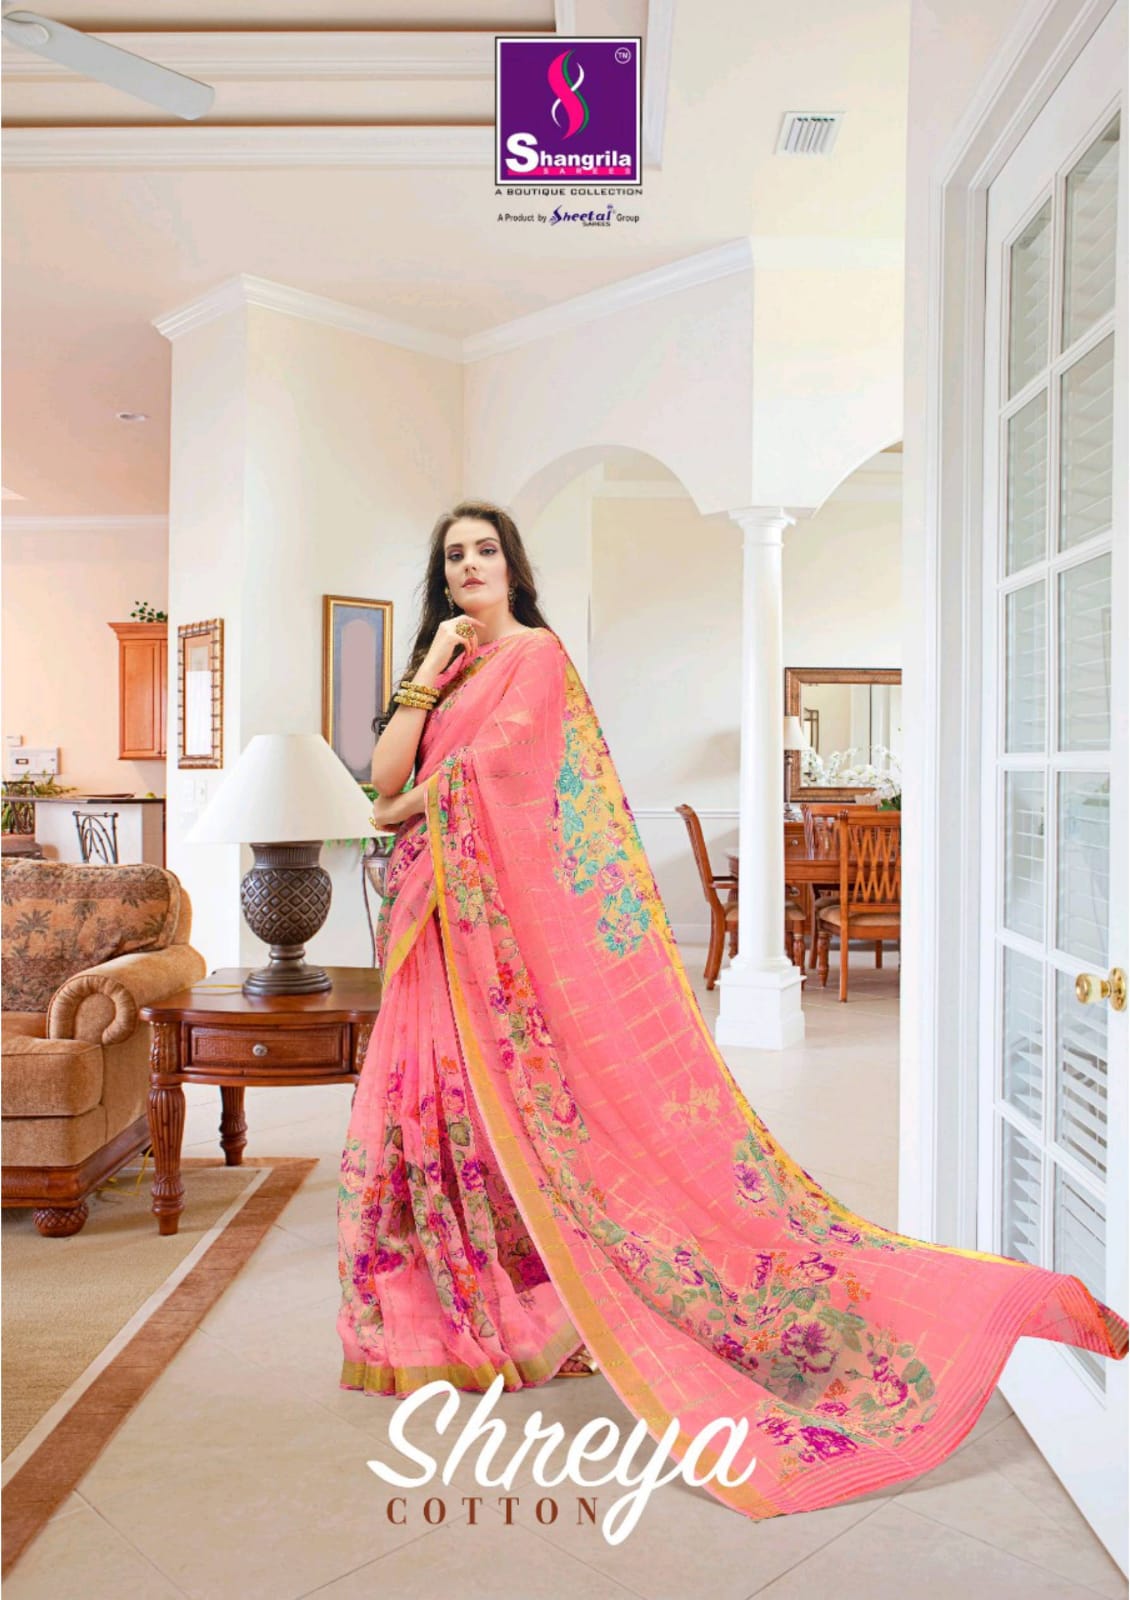 Shreya Cotton By Shangrila Linen Cotton Rich Collection Of Saree Supplier In Surat